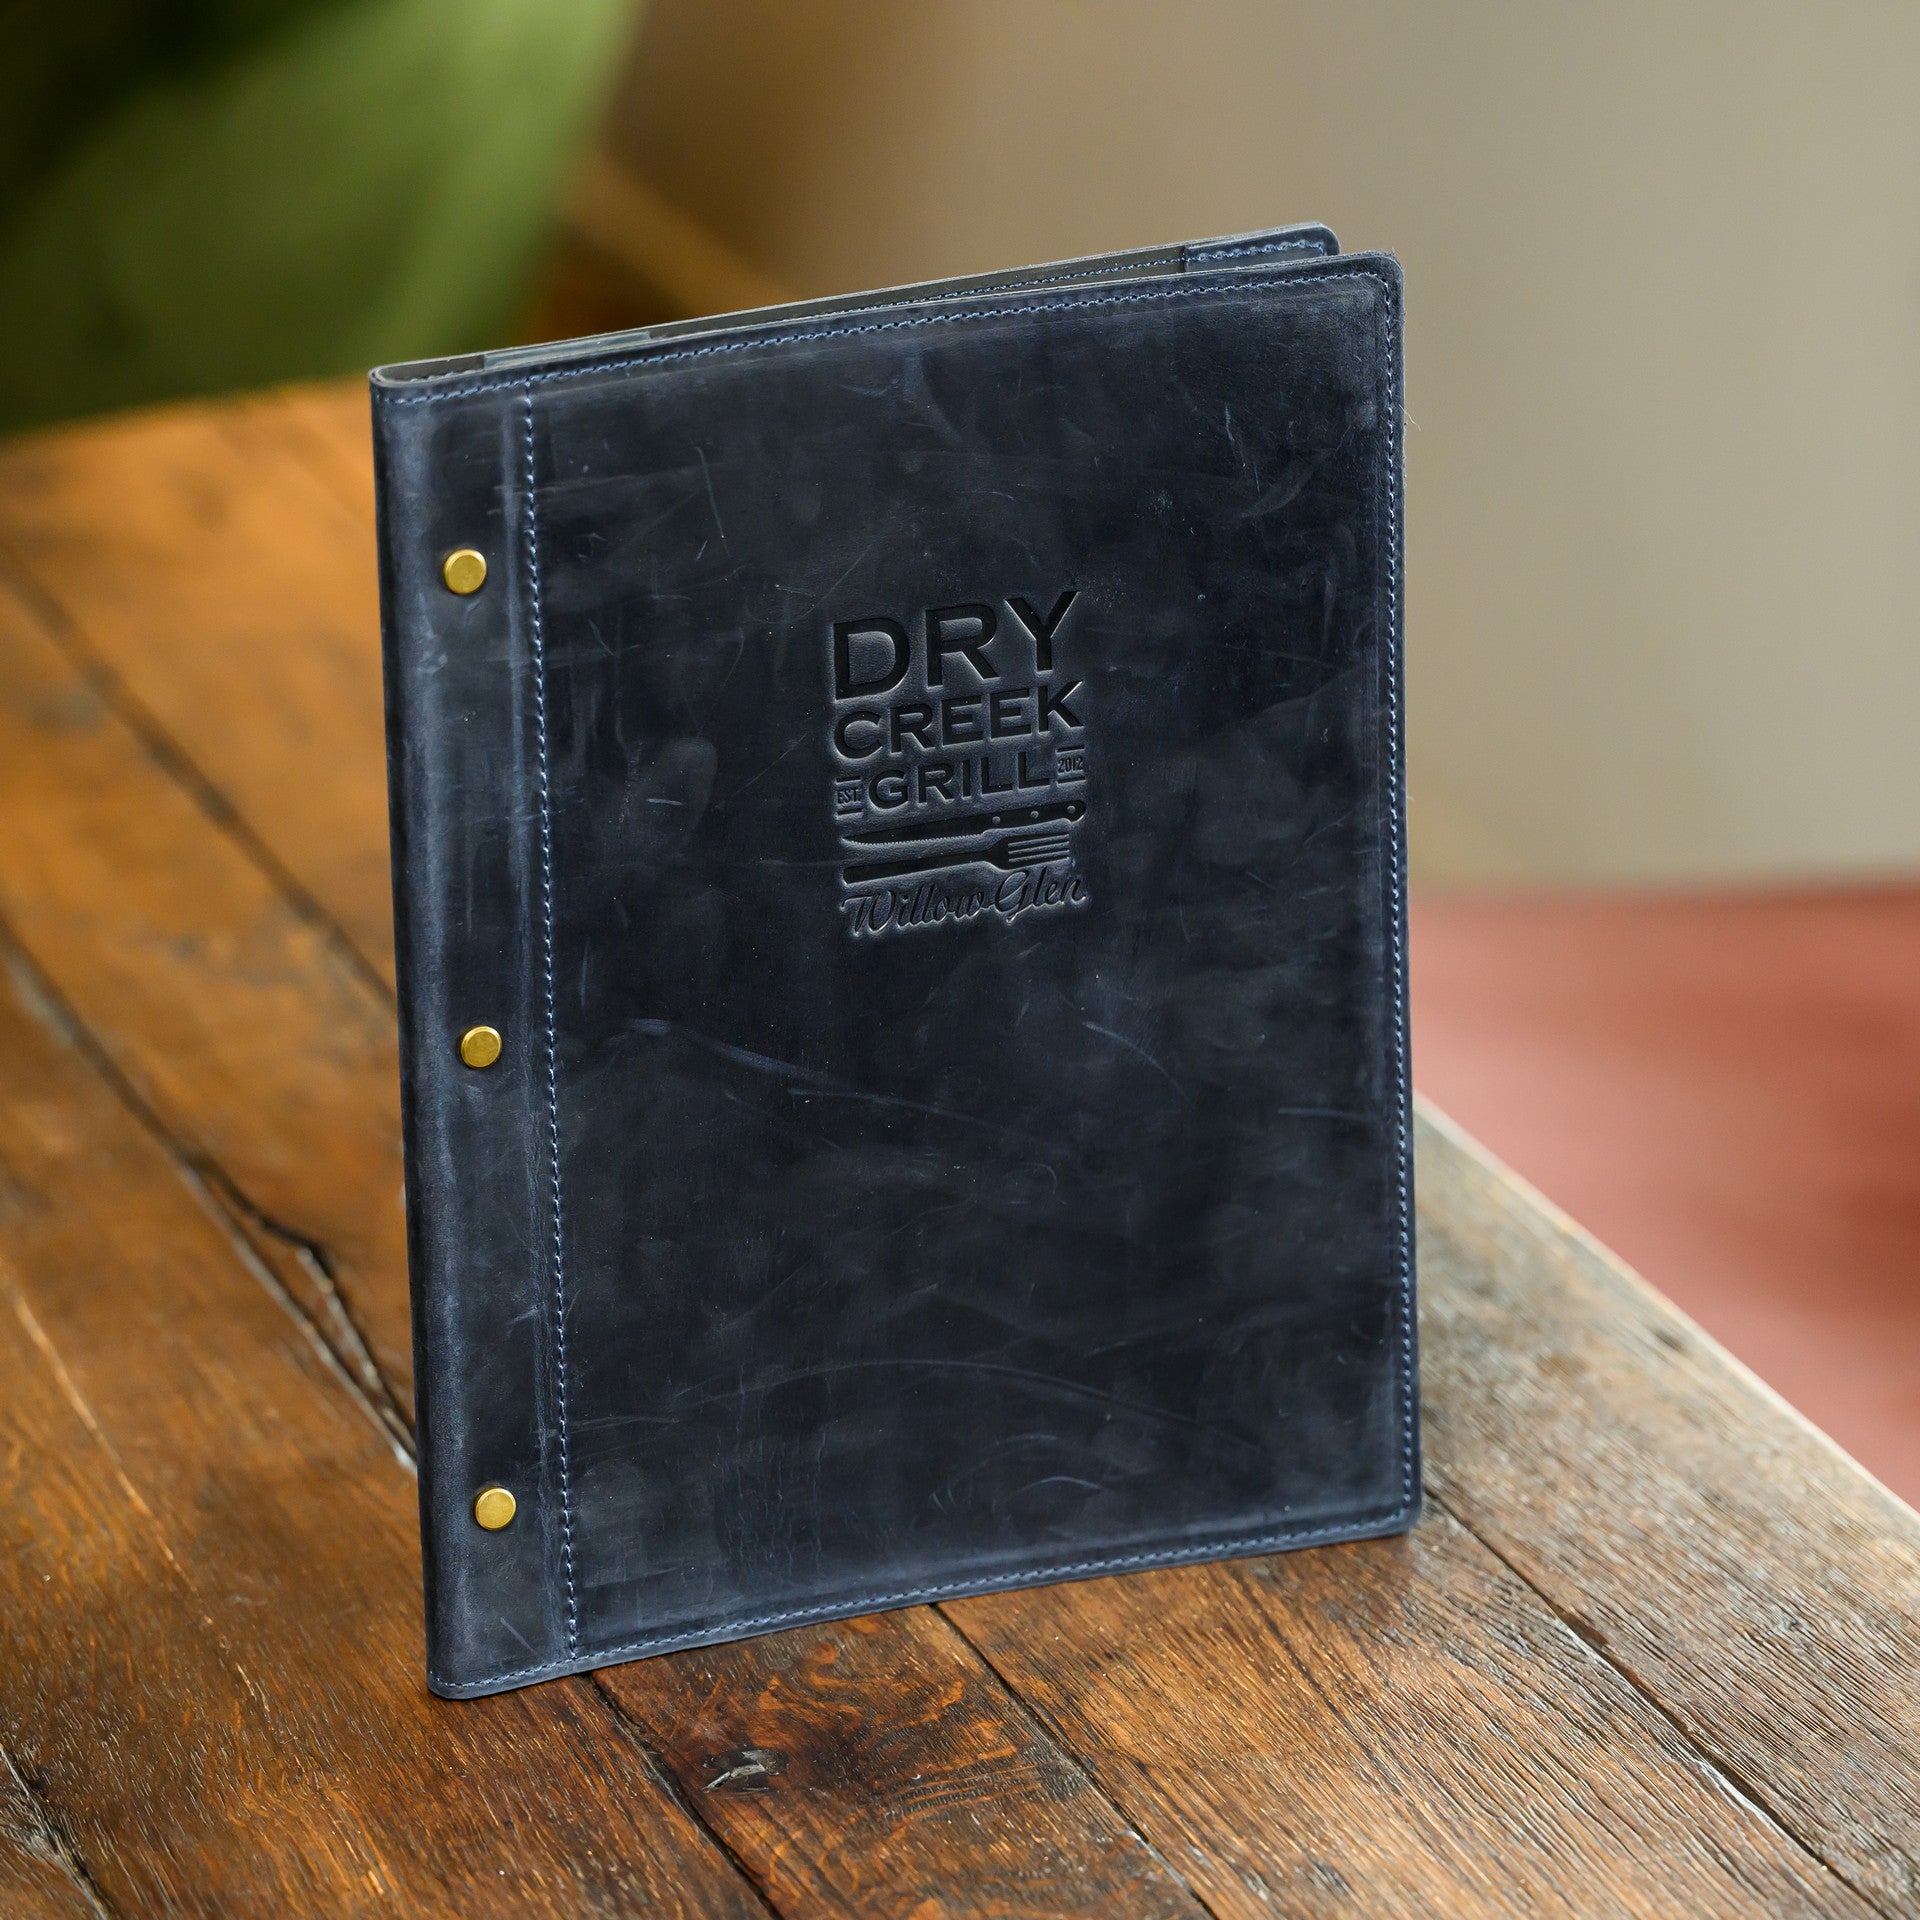 Present your menus confidently with our hard cover holder, featuring secure corner mounting.